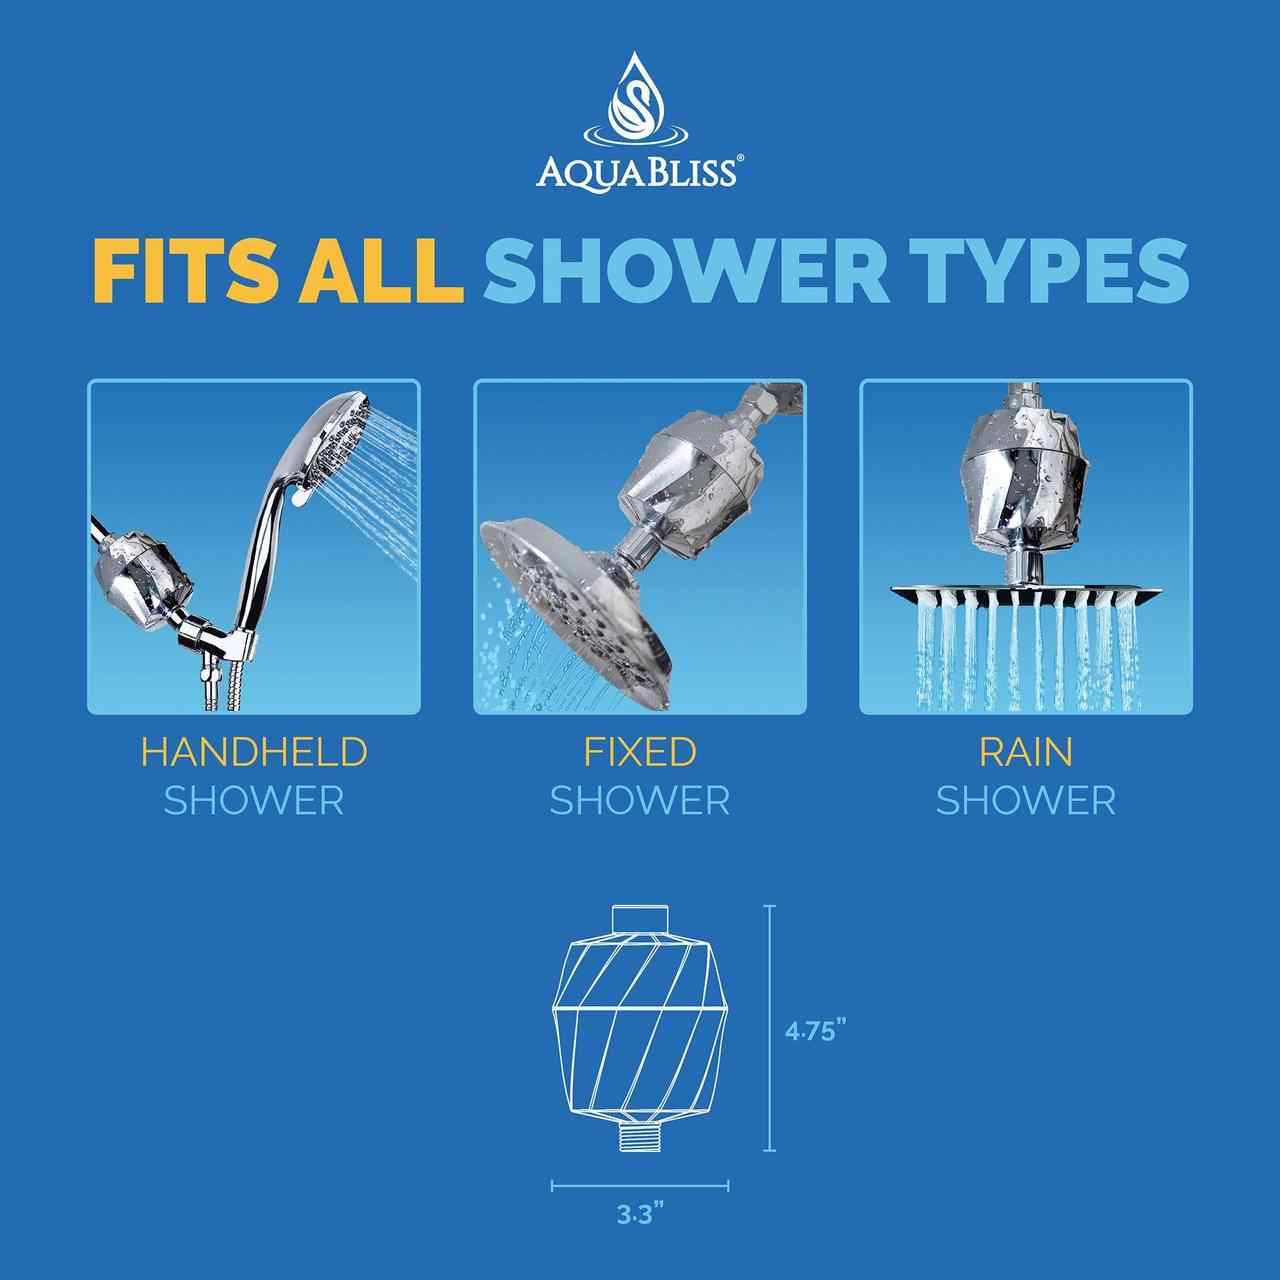 Sf220 Shower Filter is compatible with all shower types